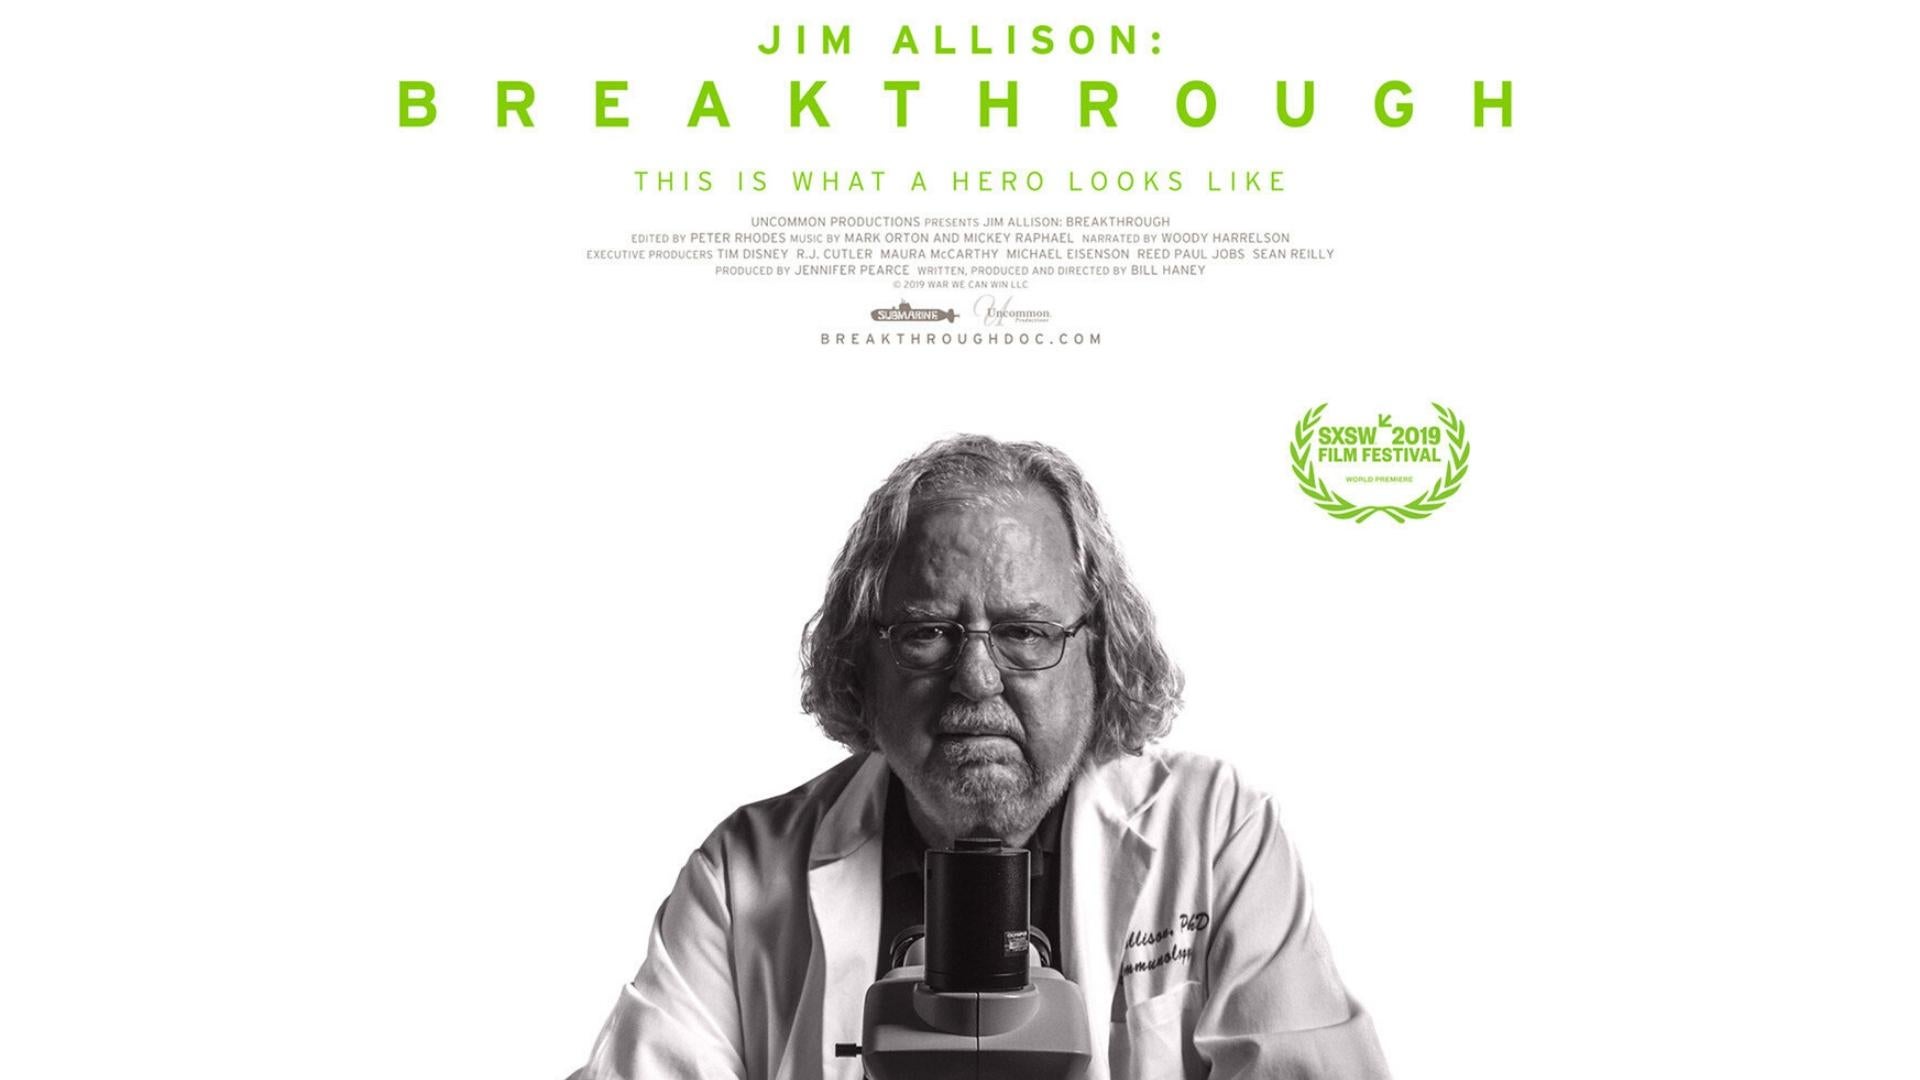 image of Jim Allison: Breakthrough movie poster, with film information and photo of Dr. Jim Allison